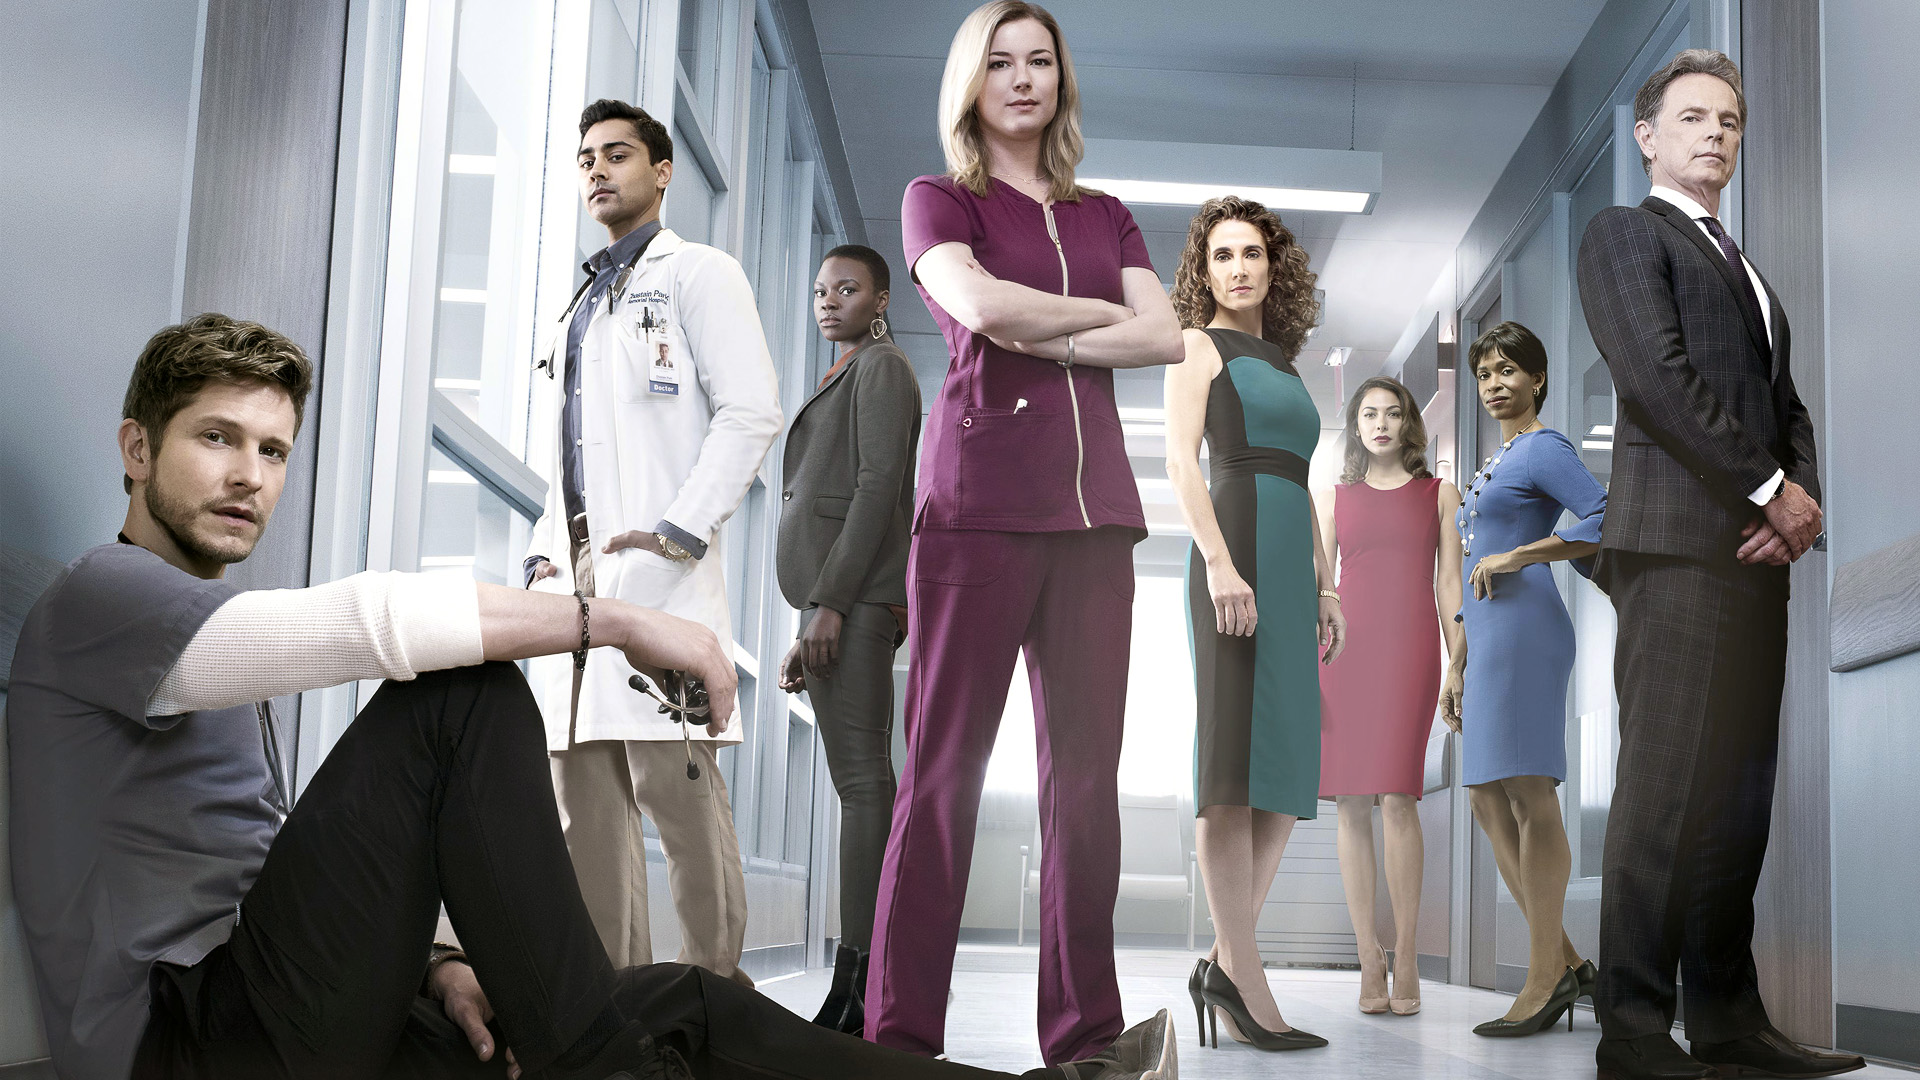 The Resident S2 episode 15 watch online